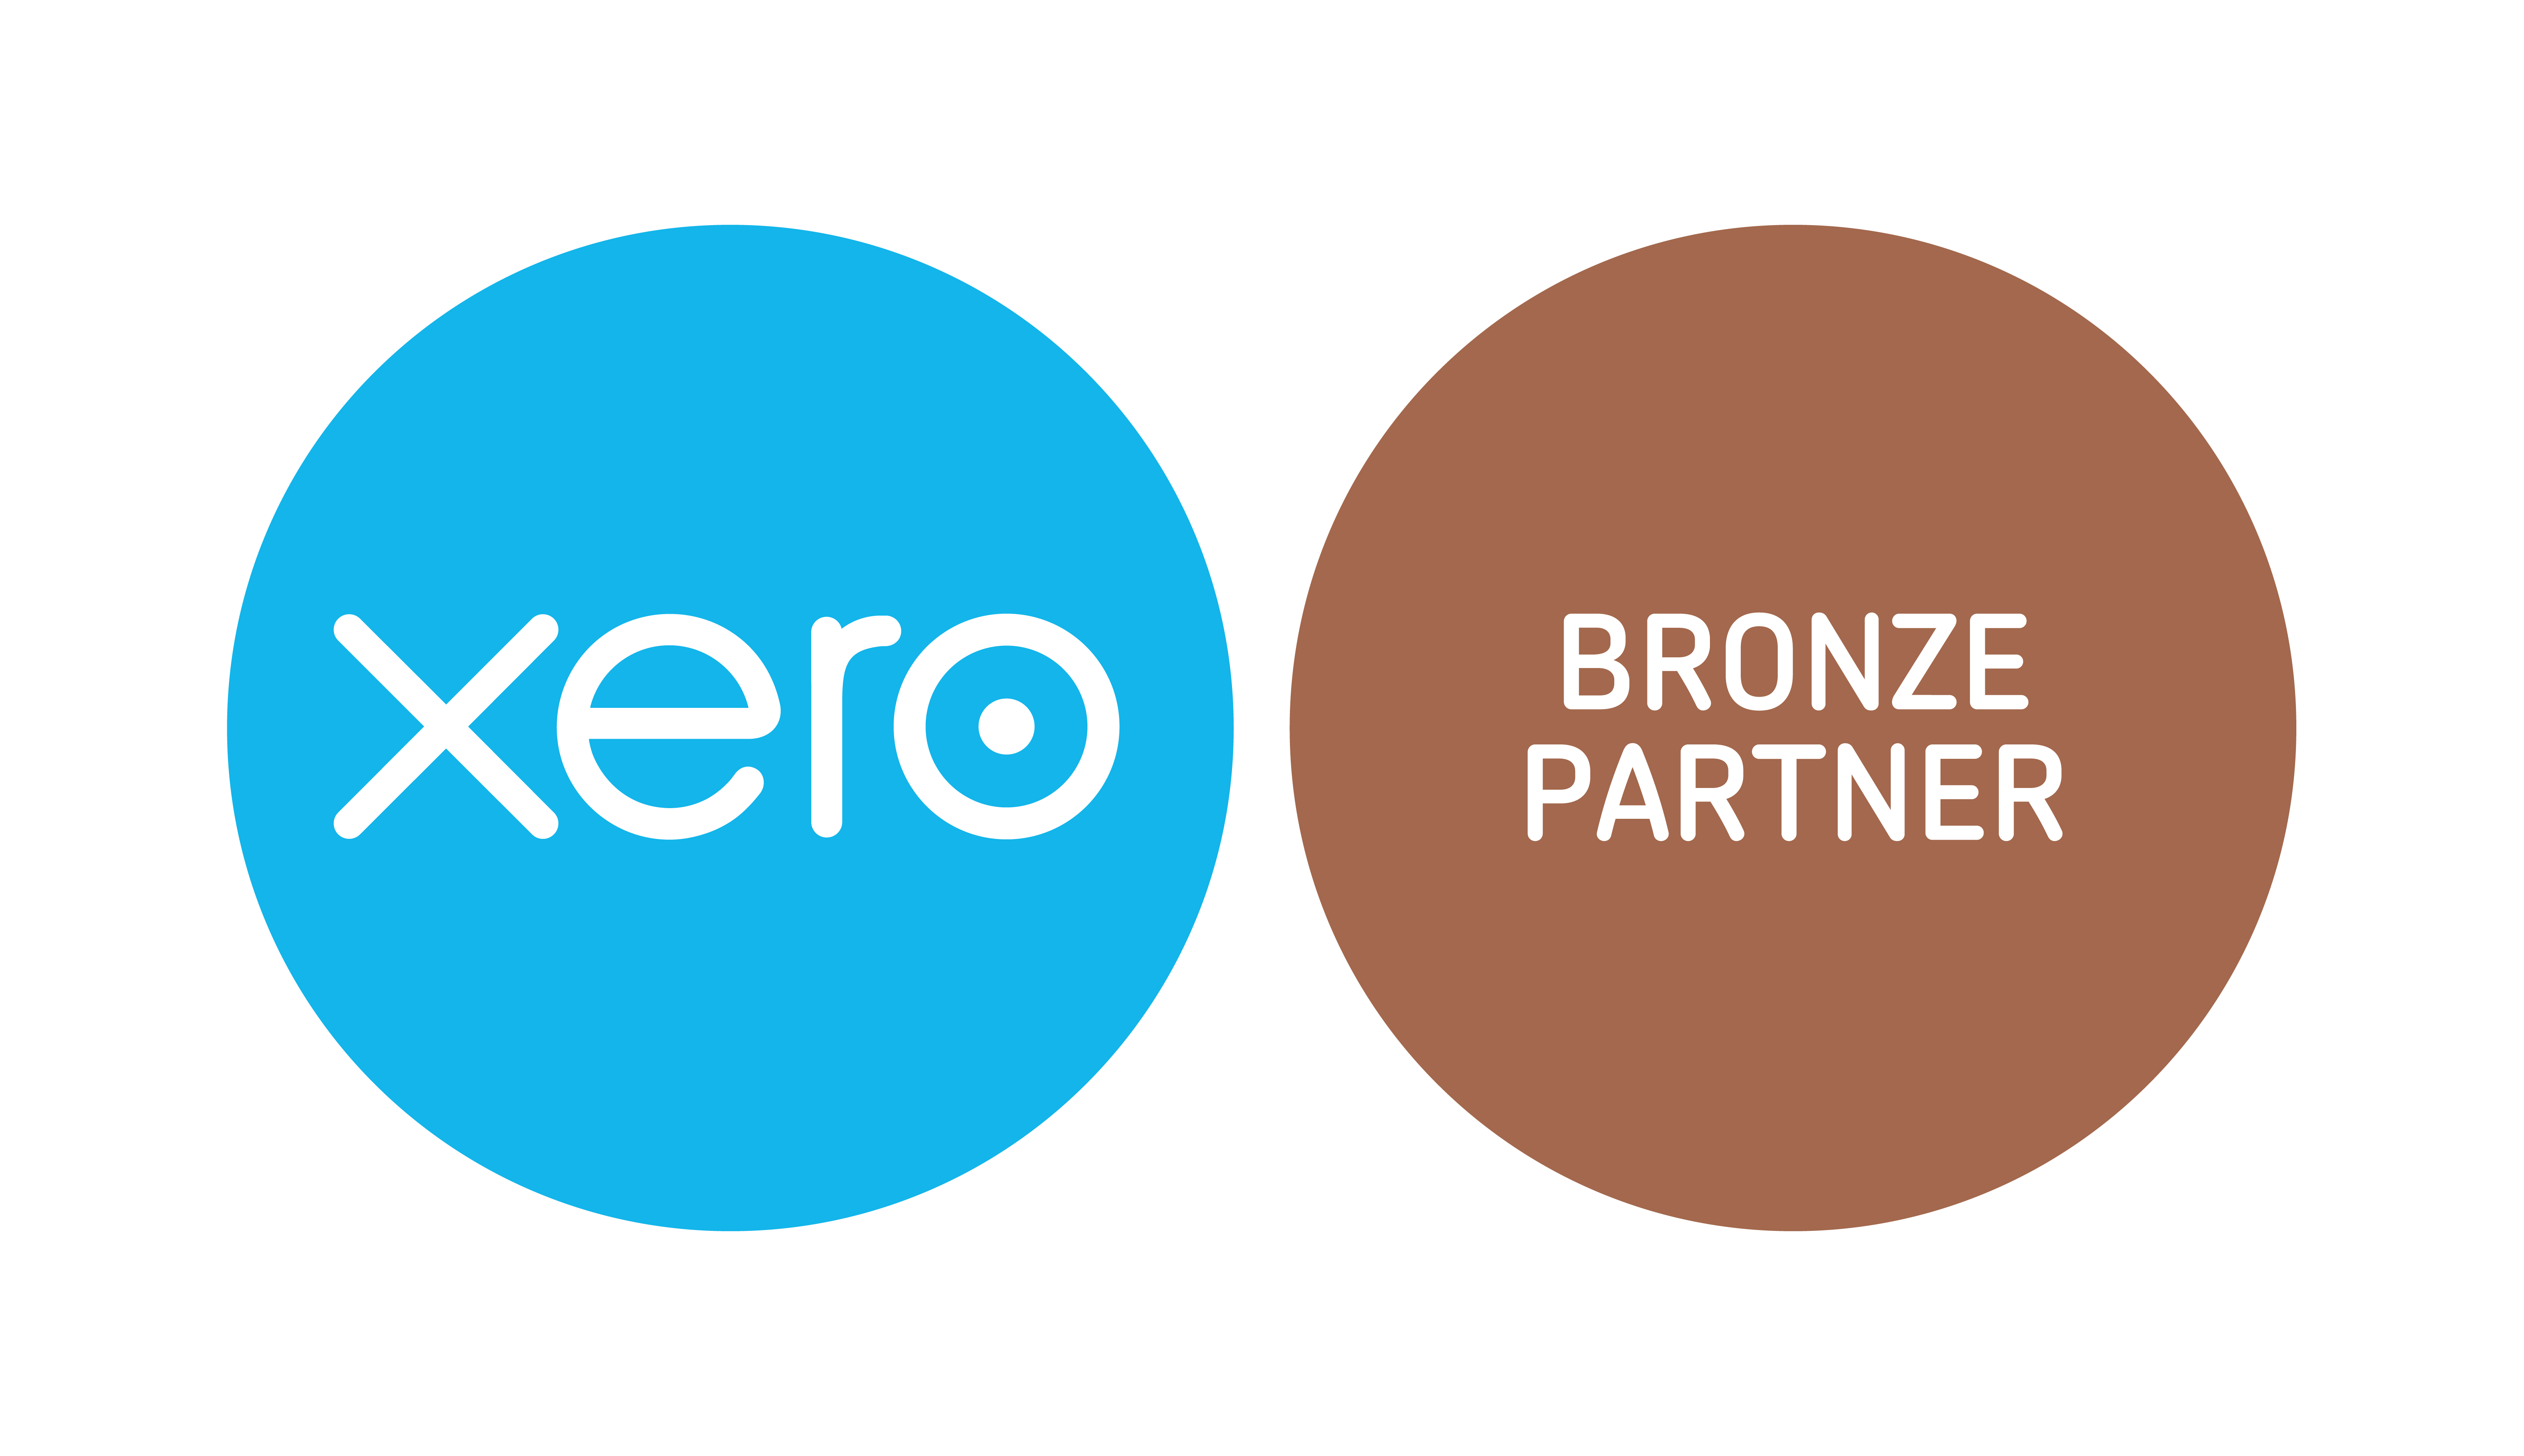 We are proud to be a Xero Bronze Partner